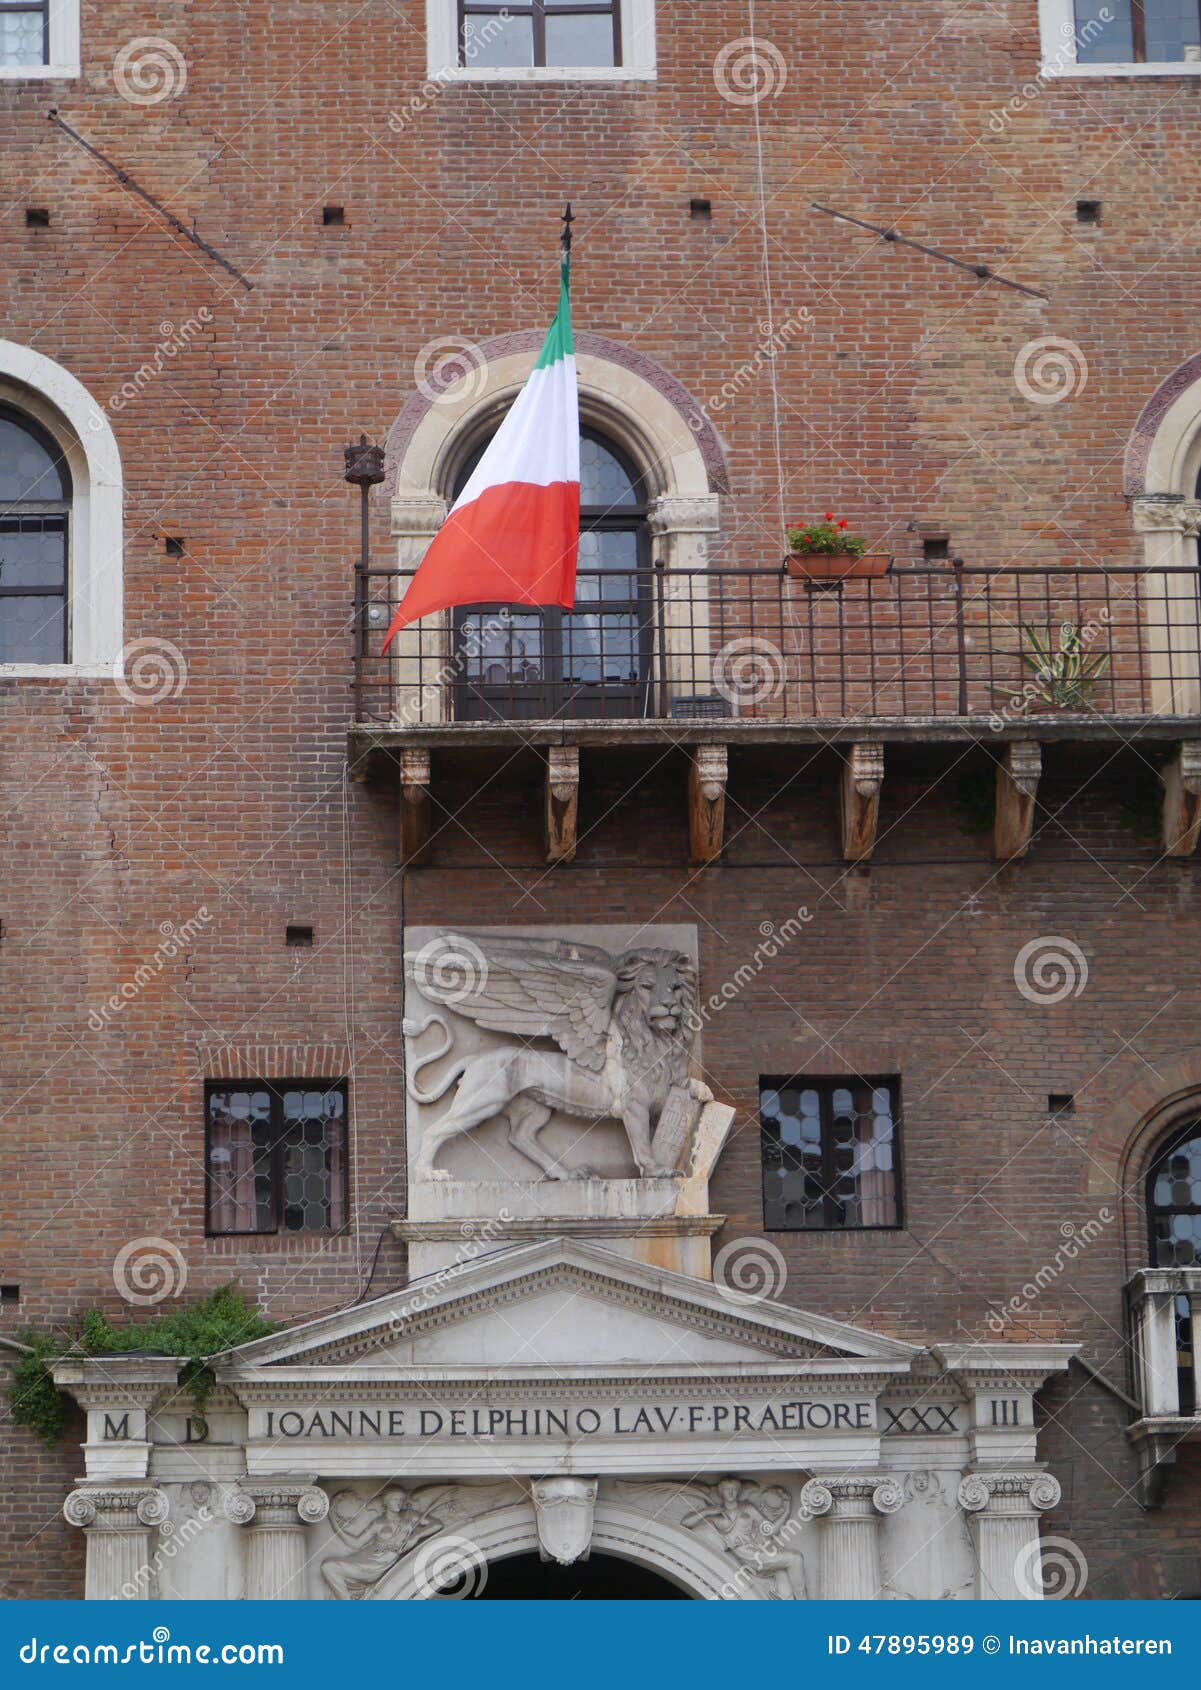 governo oalace with the winged lion of venezia